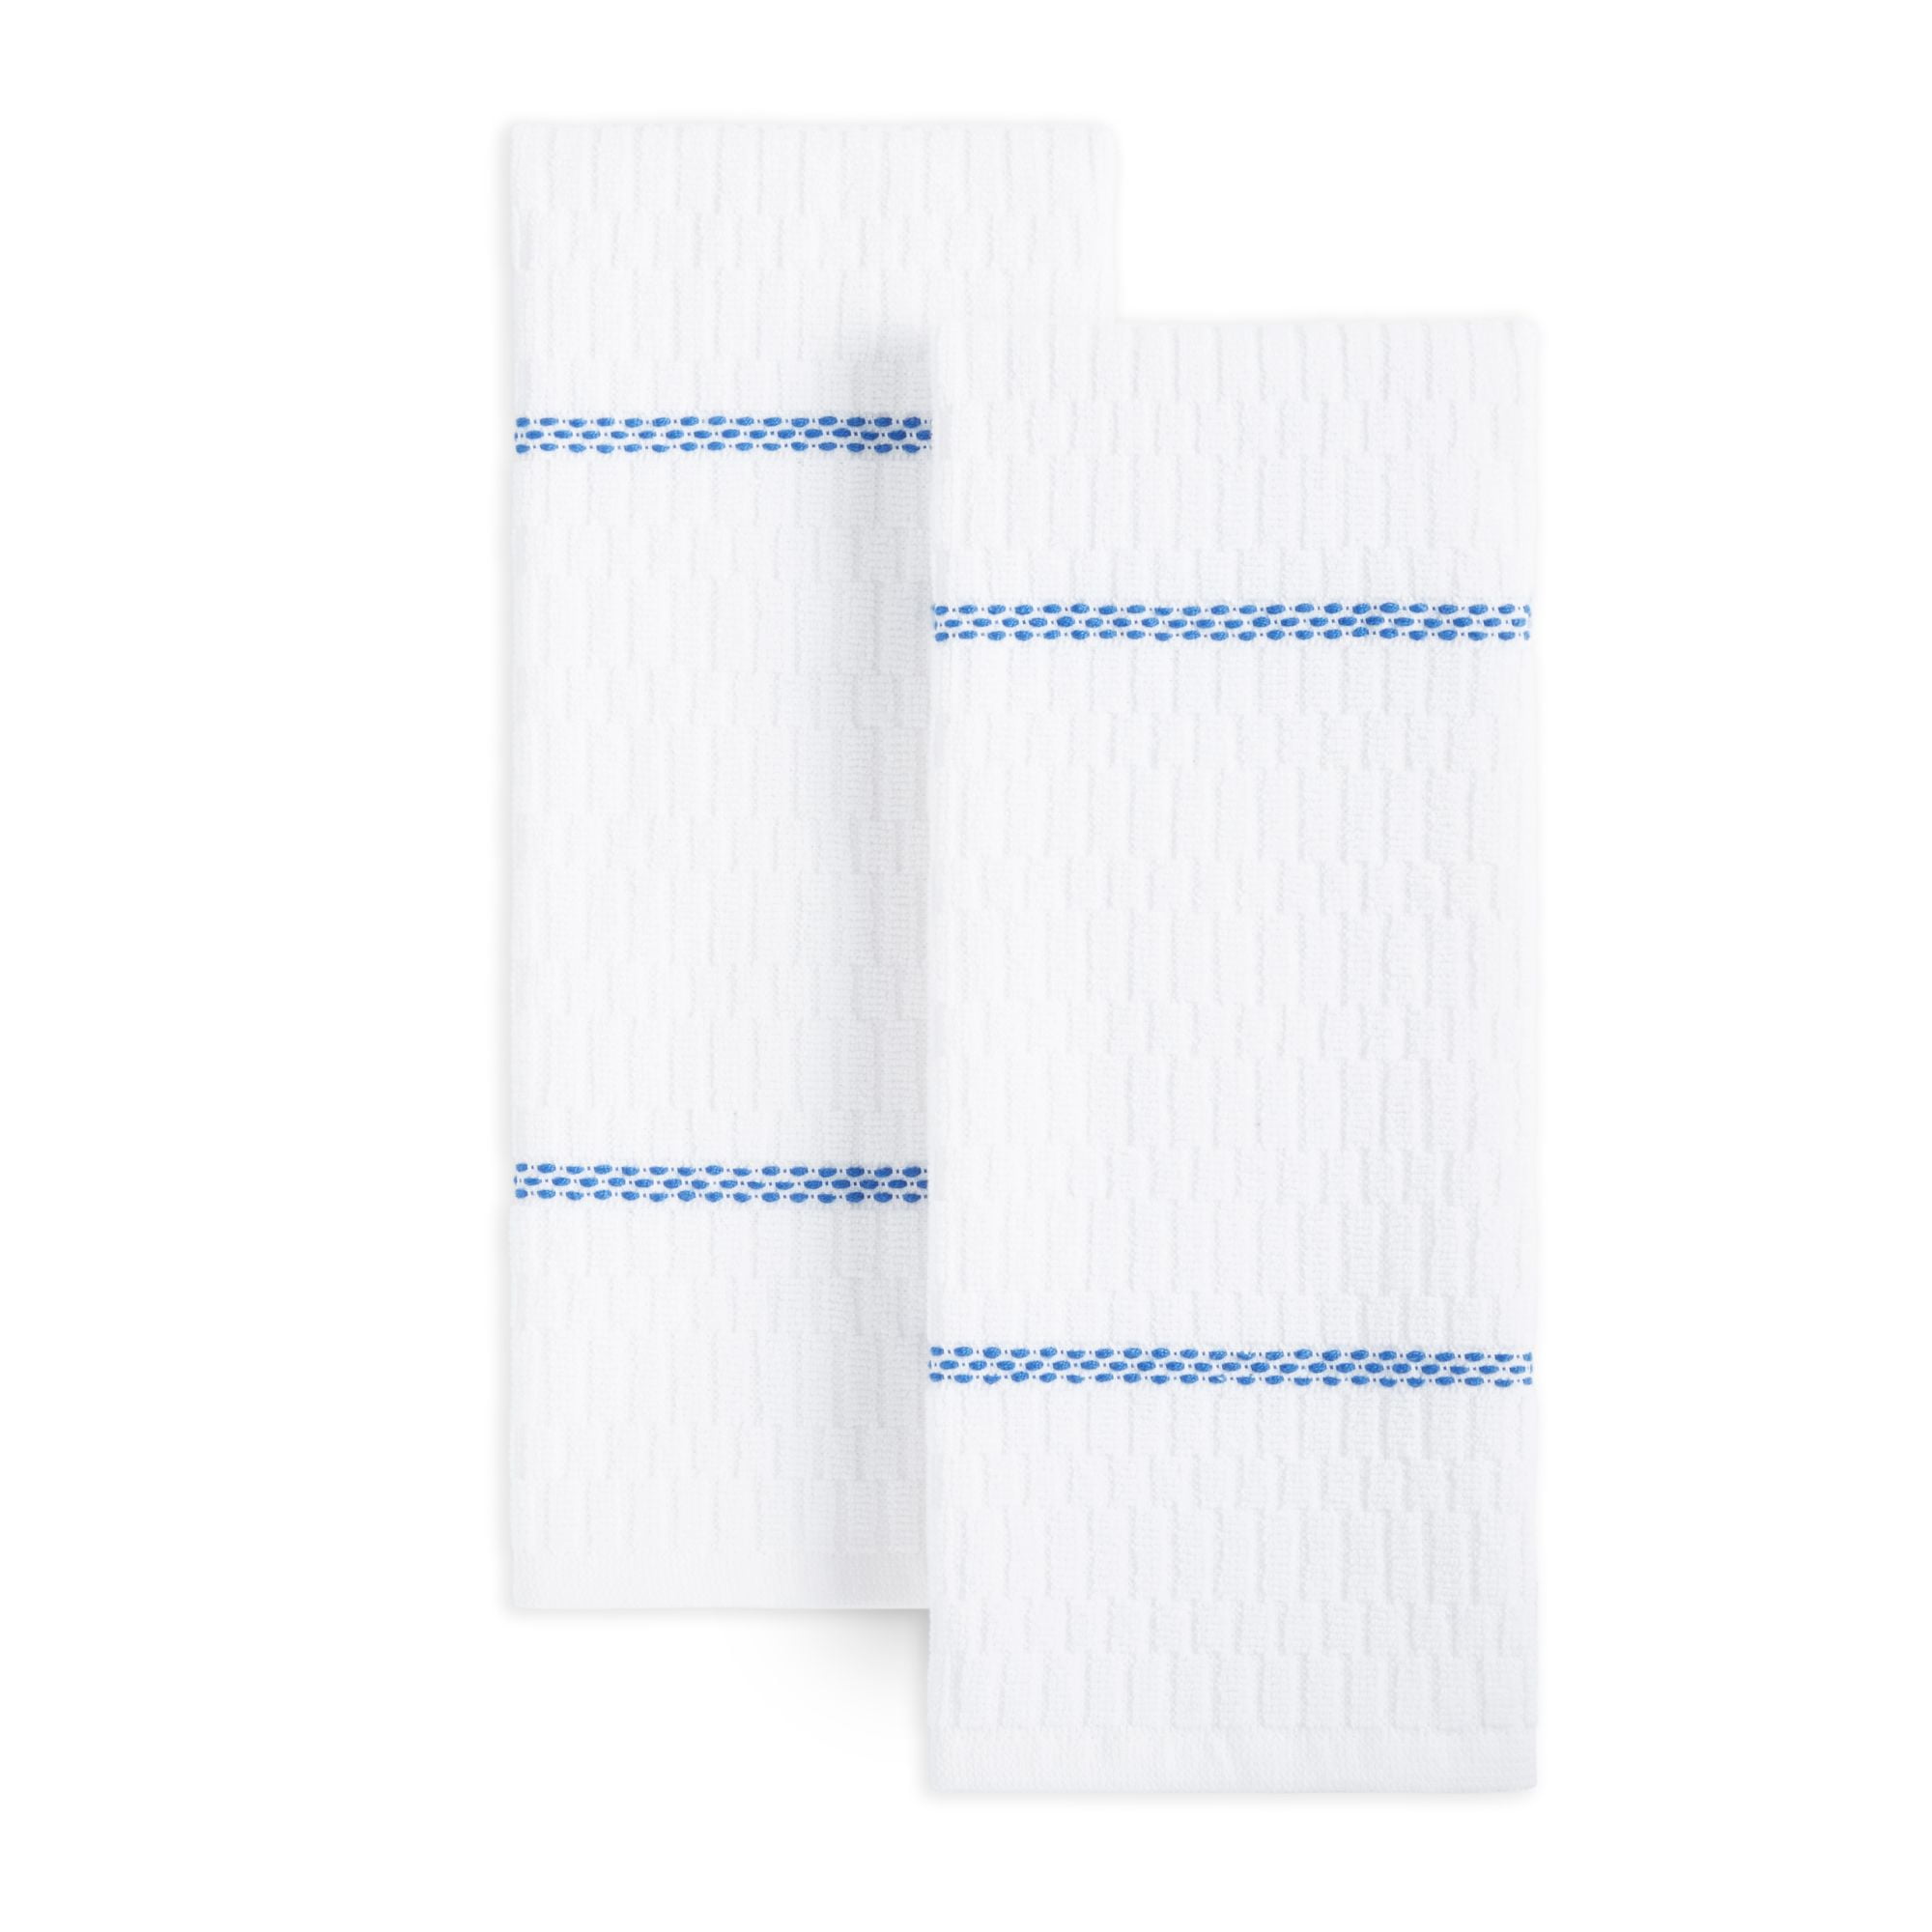 Clorox Dish Cloths Dishcloths Dish Rags 3 Pk Antimicrobial Protected Bleach  Safe : Buy Online at Best Price in KSA - Souq is now : Home